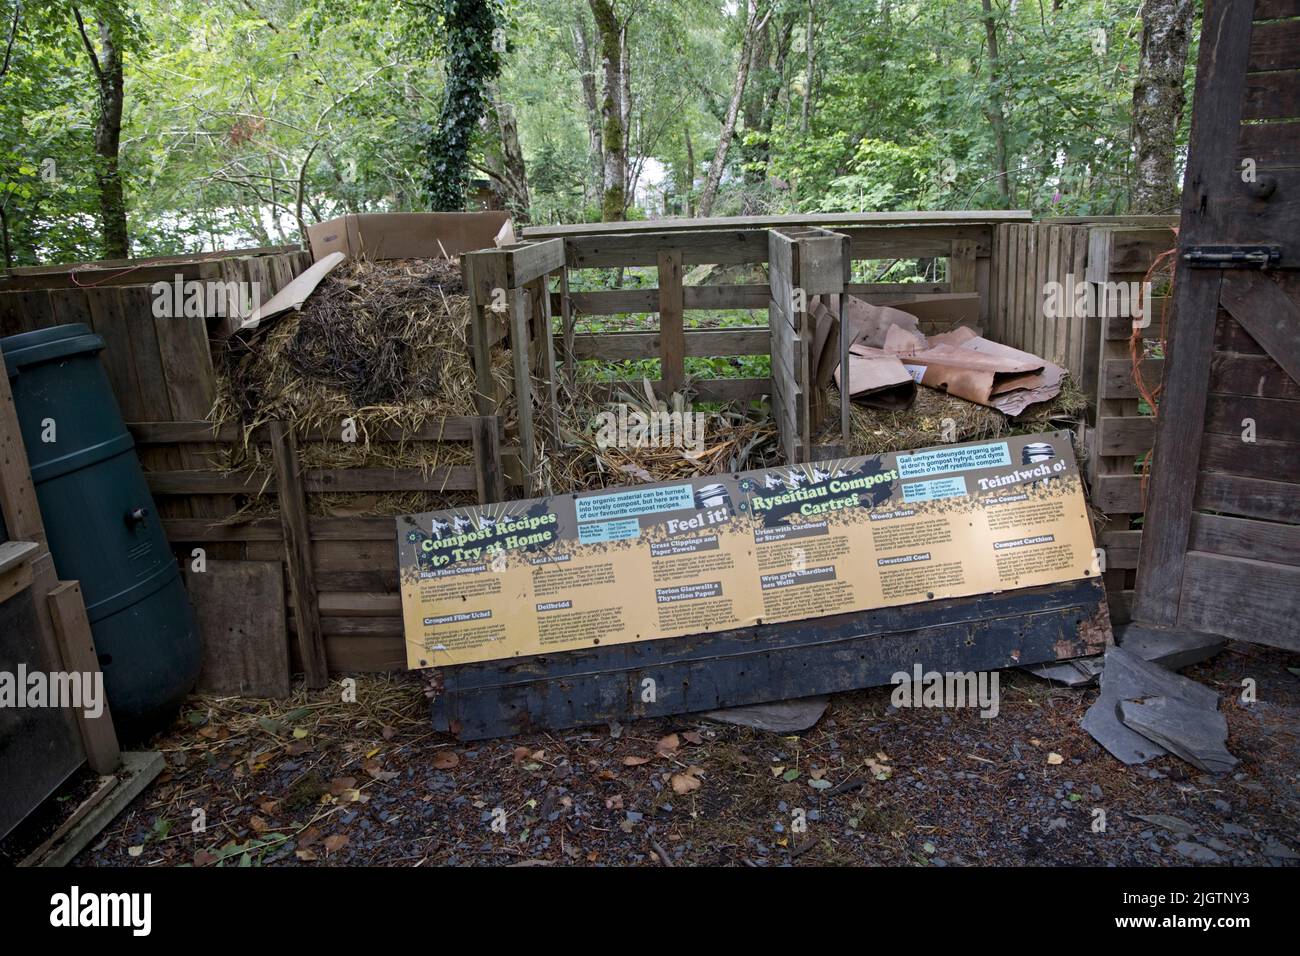 Three bin composting system made from pallets at the Centre for Alternative Technology (CAT)  Powys Wales, UK Stock Photo